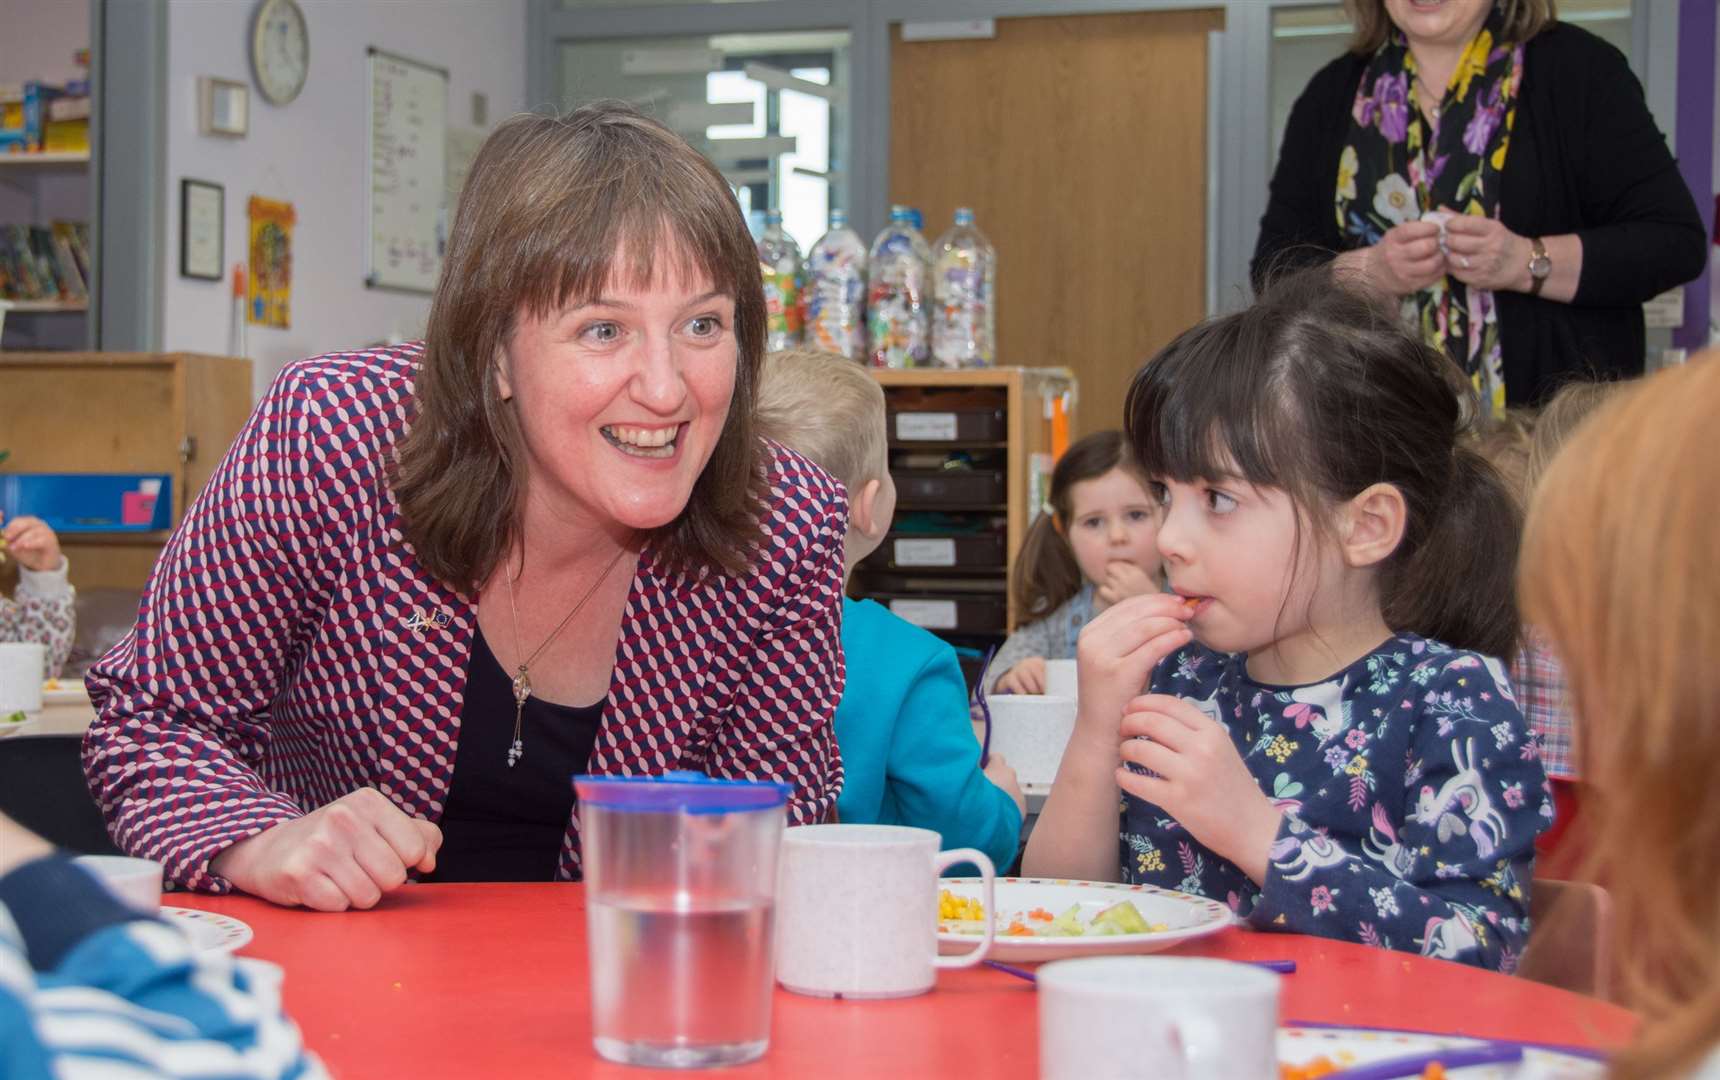 Public Health Minister Maree Todd (pictured) said the funding will help ensure children in Scotland have access to healthy, nutritious food.